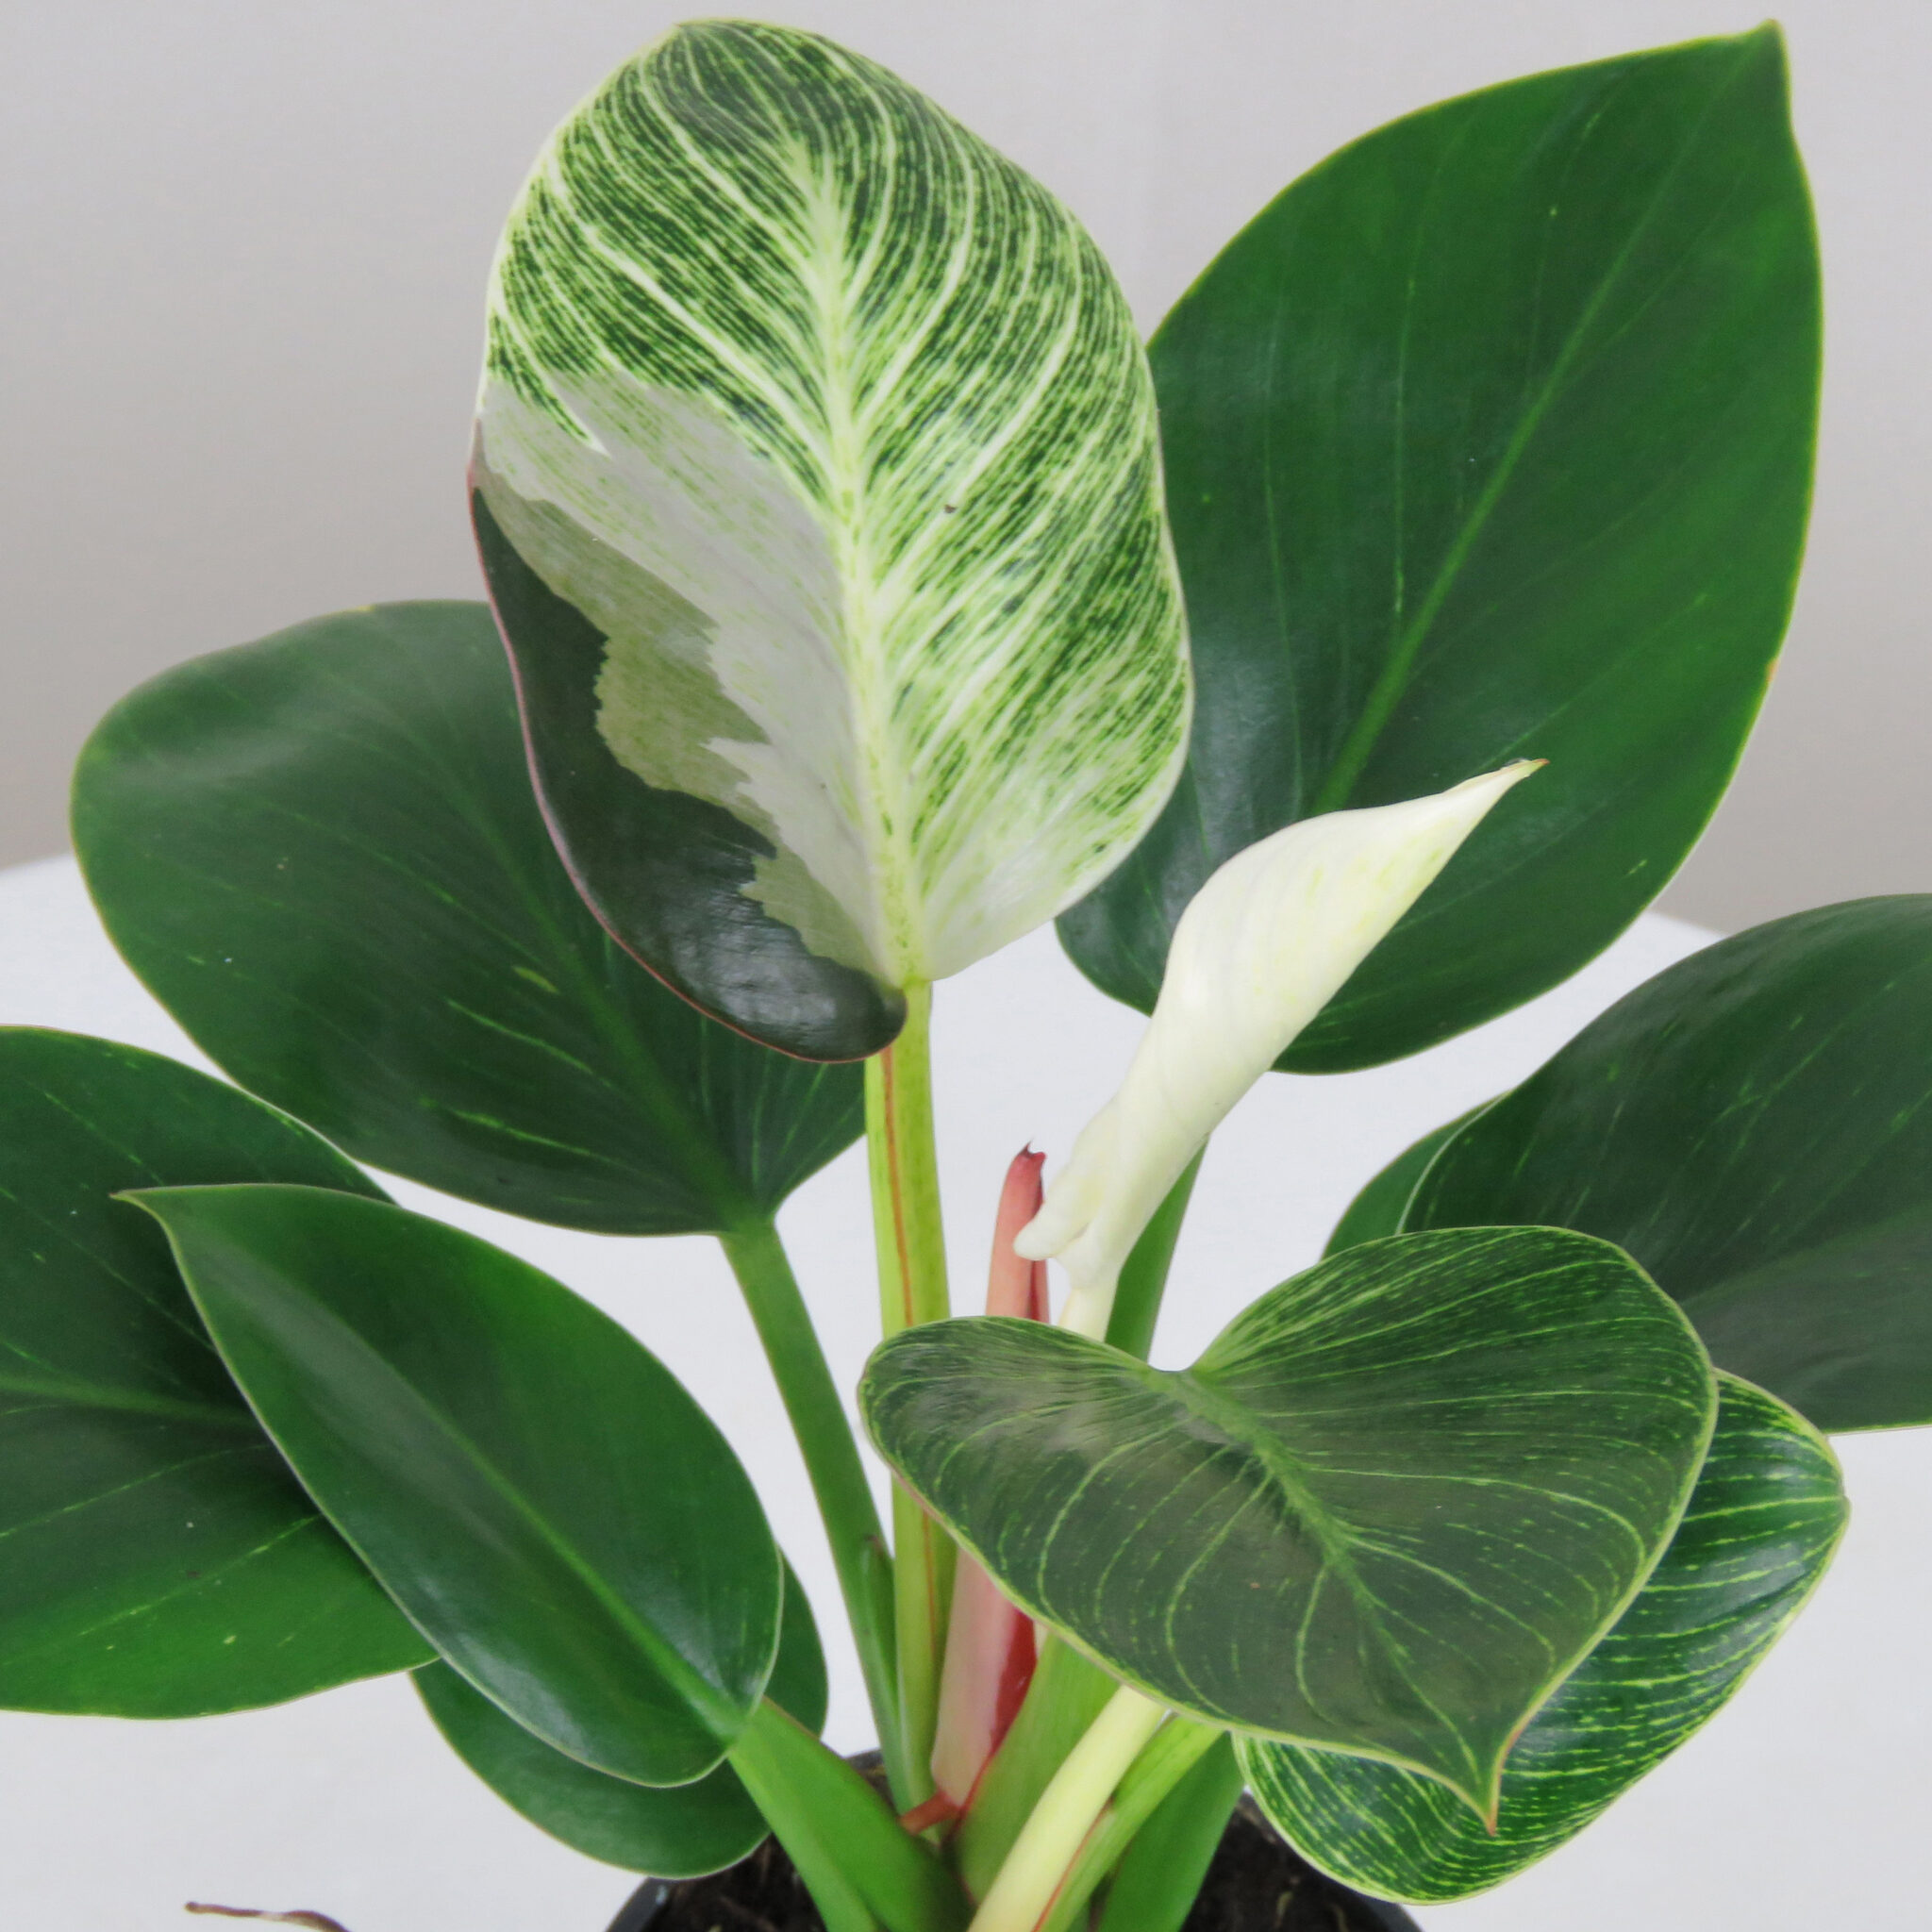 Variegated Philodendron 'Birkin' with unique coloration